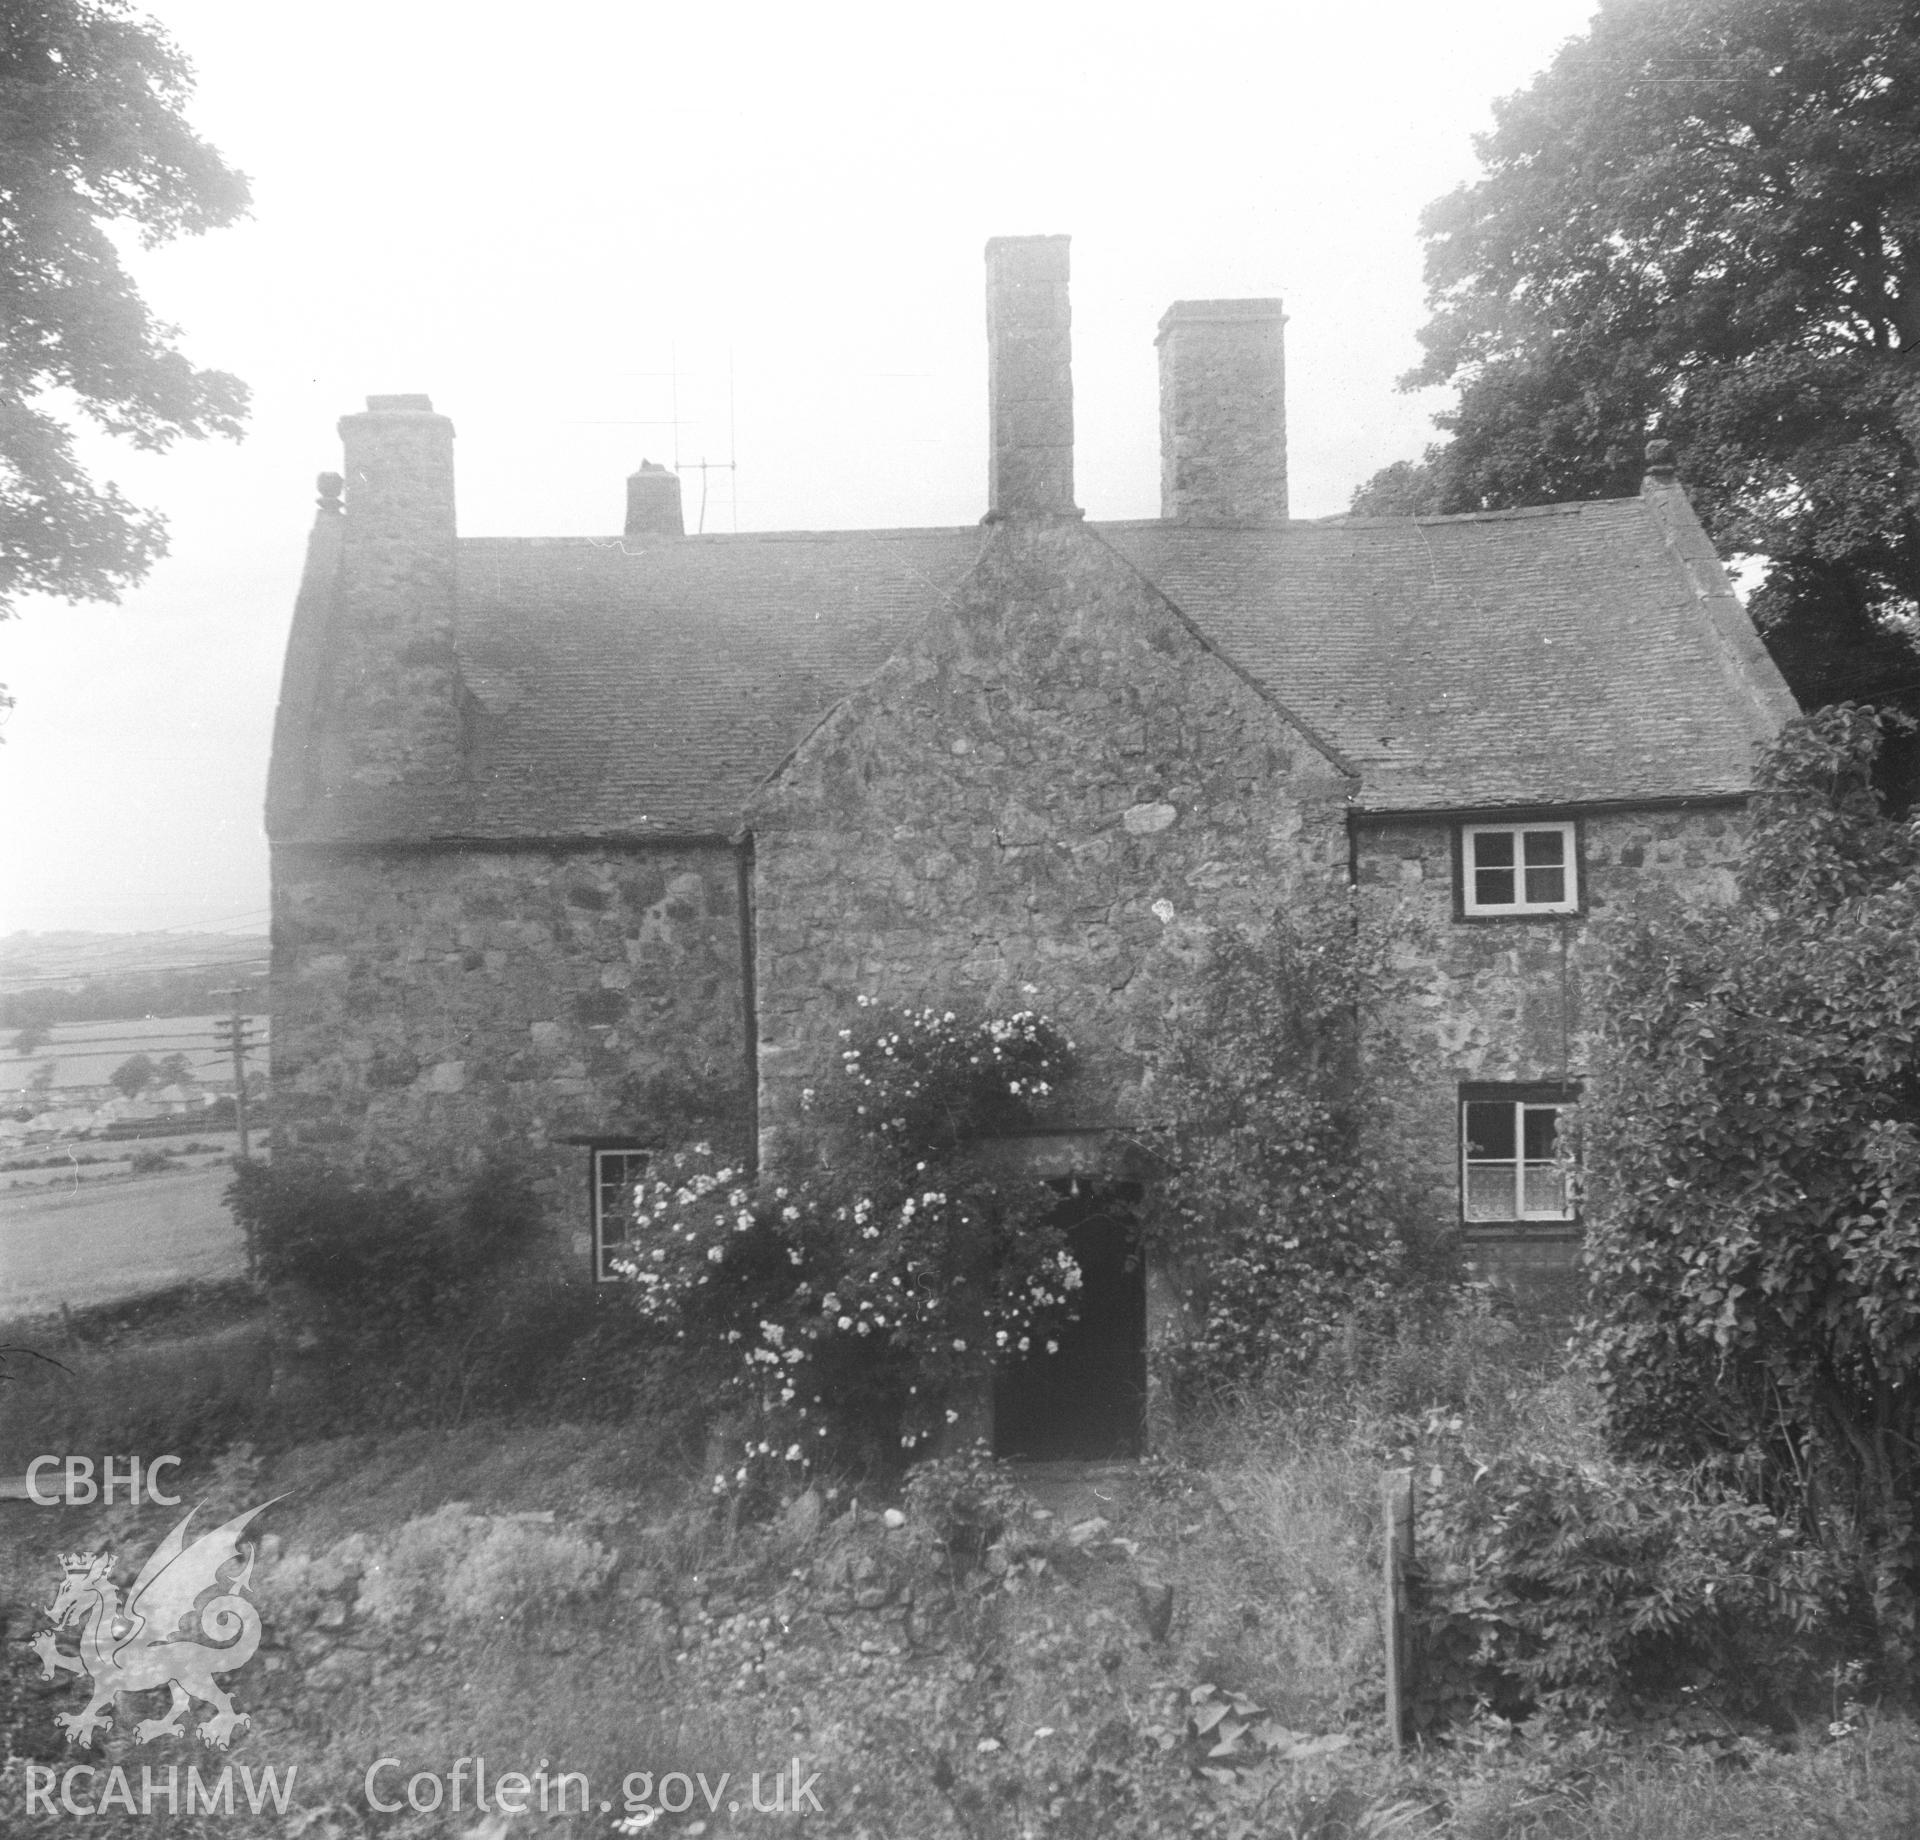 Black and white acetate negative showing exterior view, unidentified house.